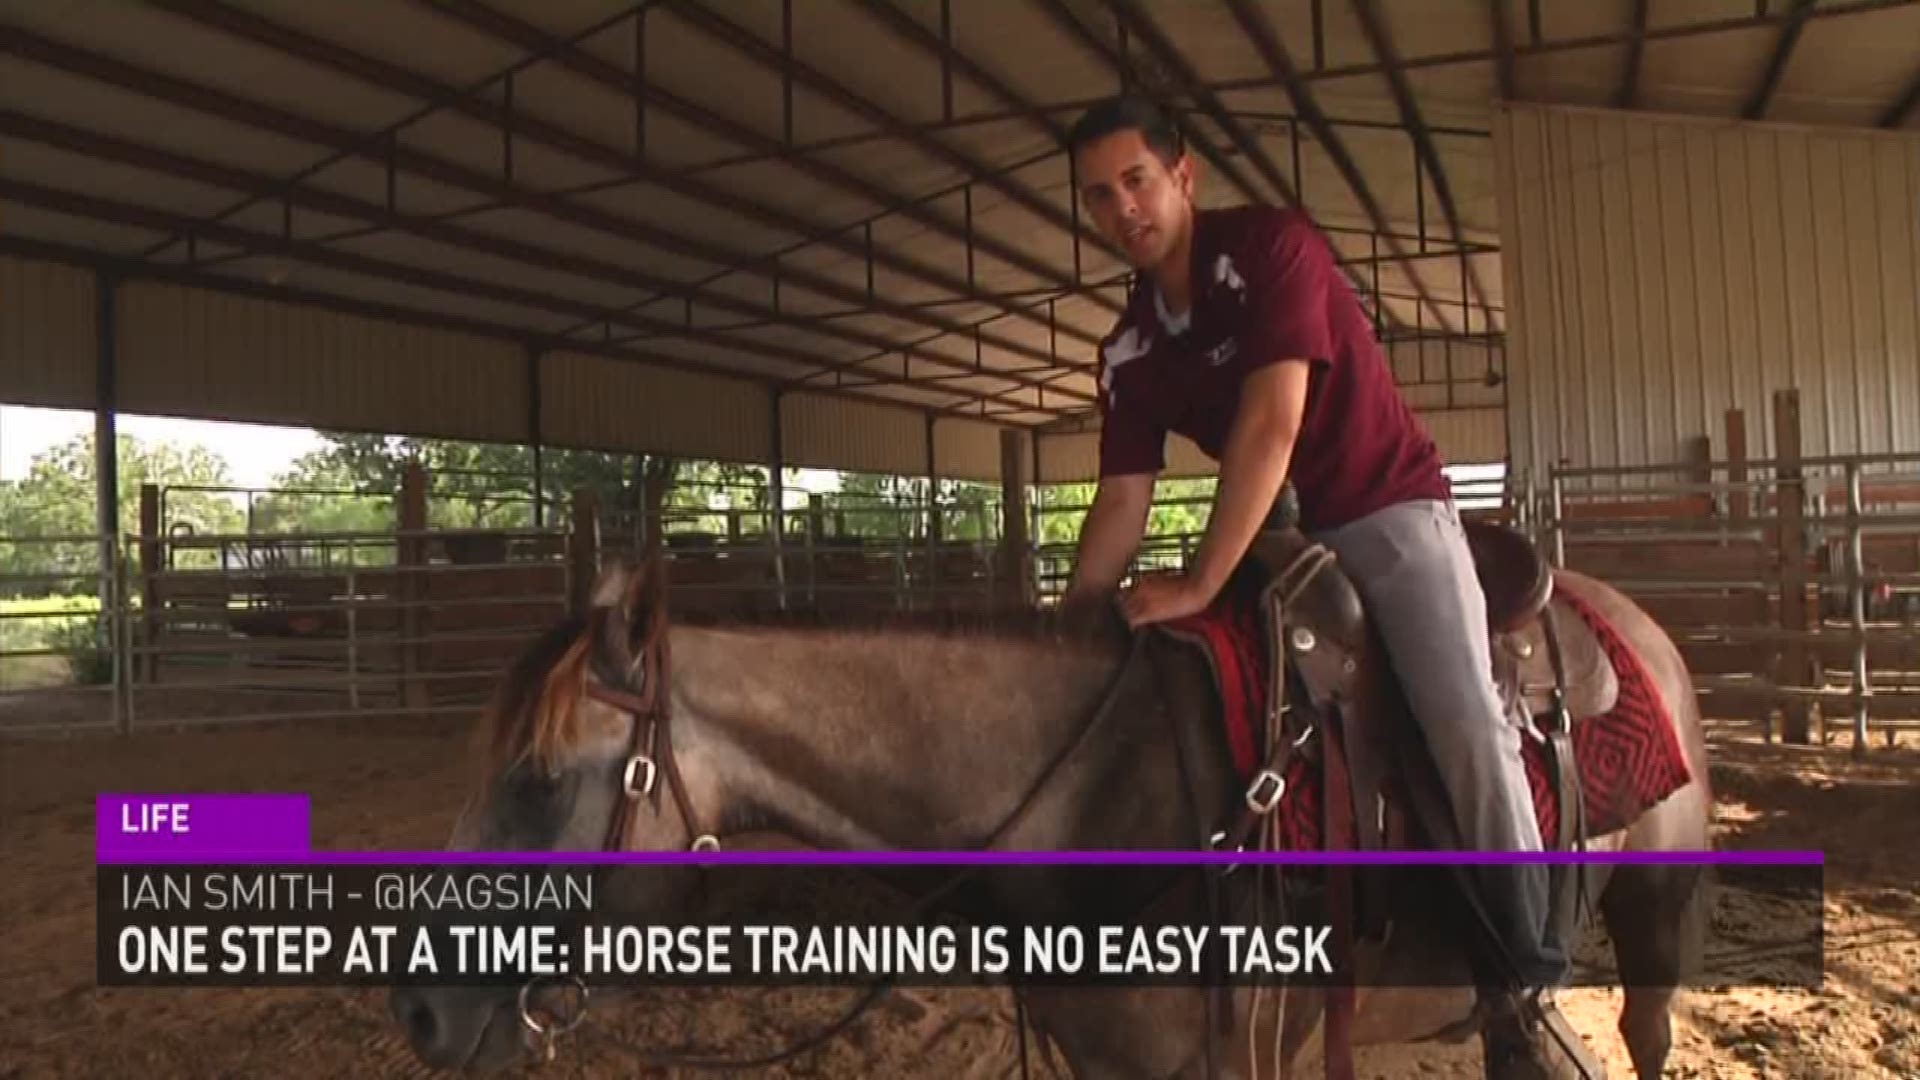 For our Tuesday Hot Job Ian Smith meets a horse trainer!